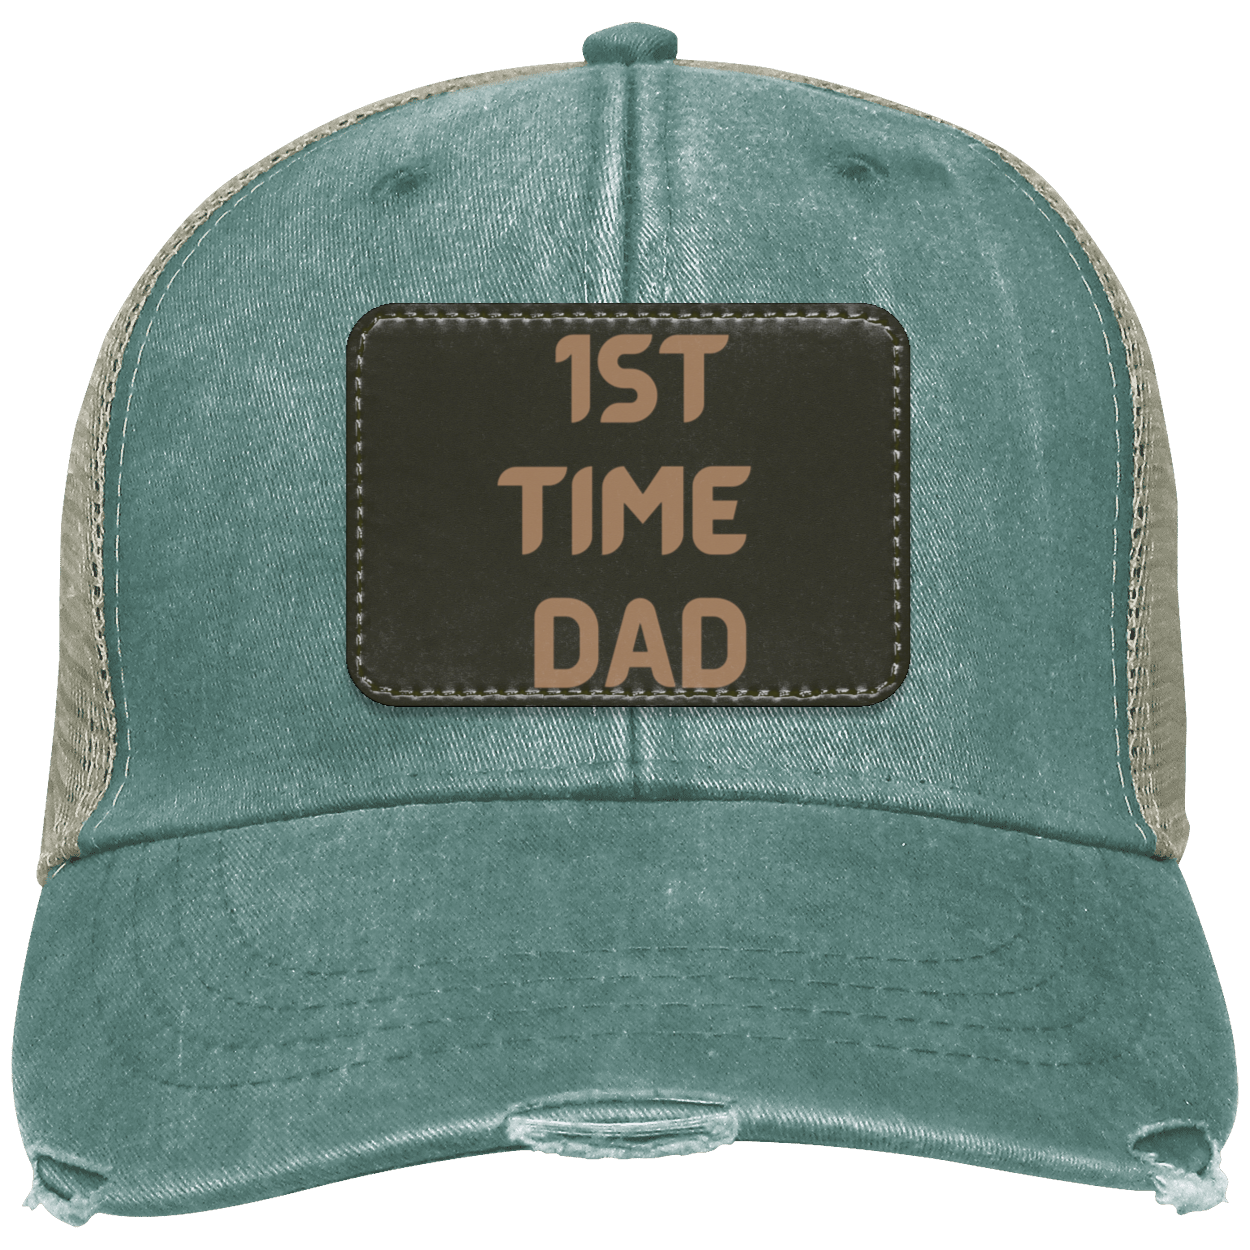 1ST TIME DAD Distressed Ollie Cap - Patch